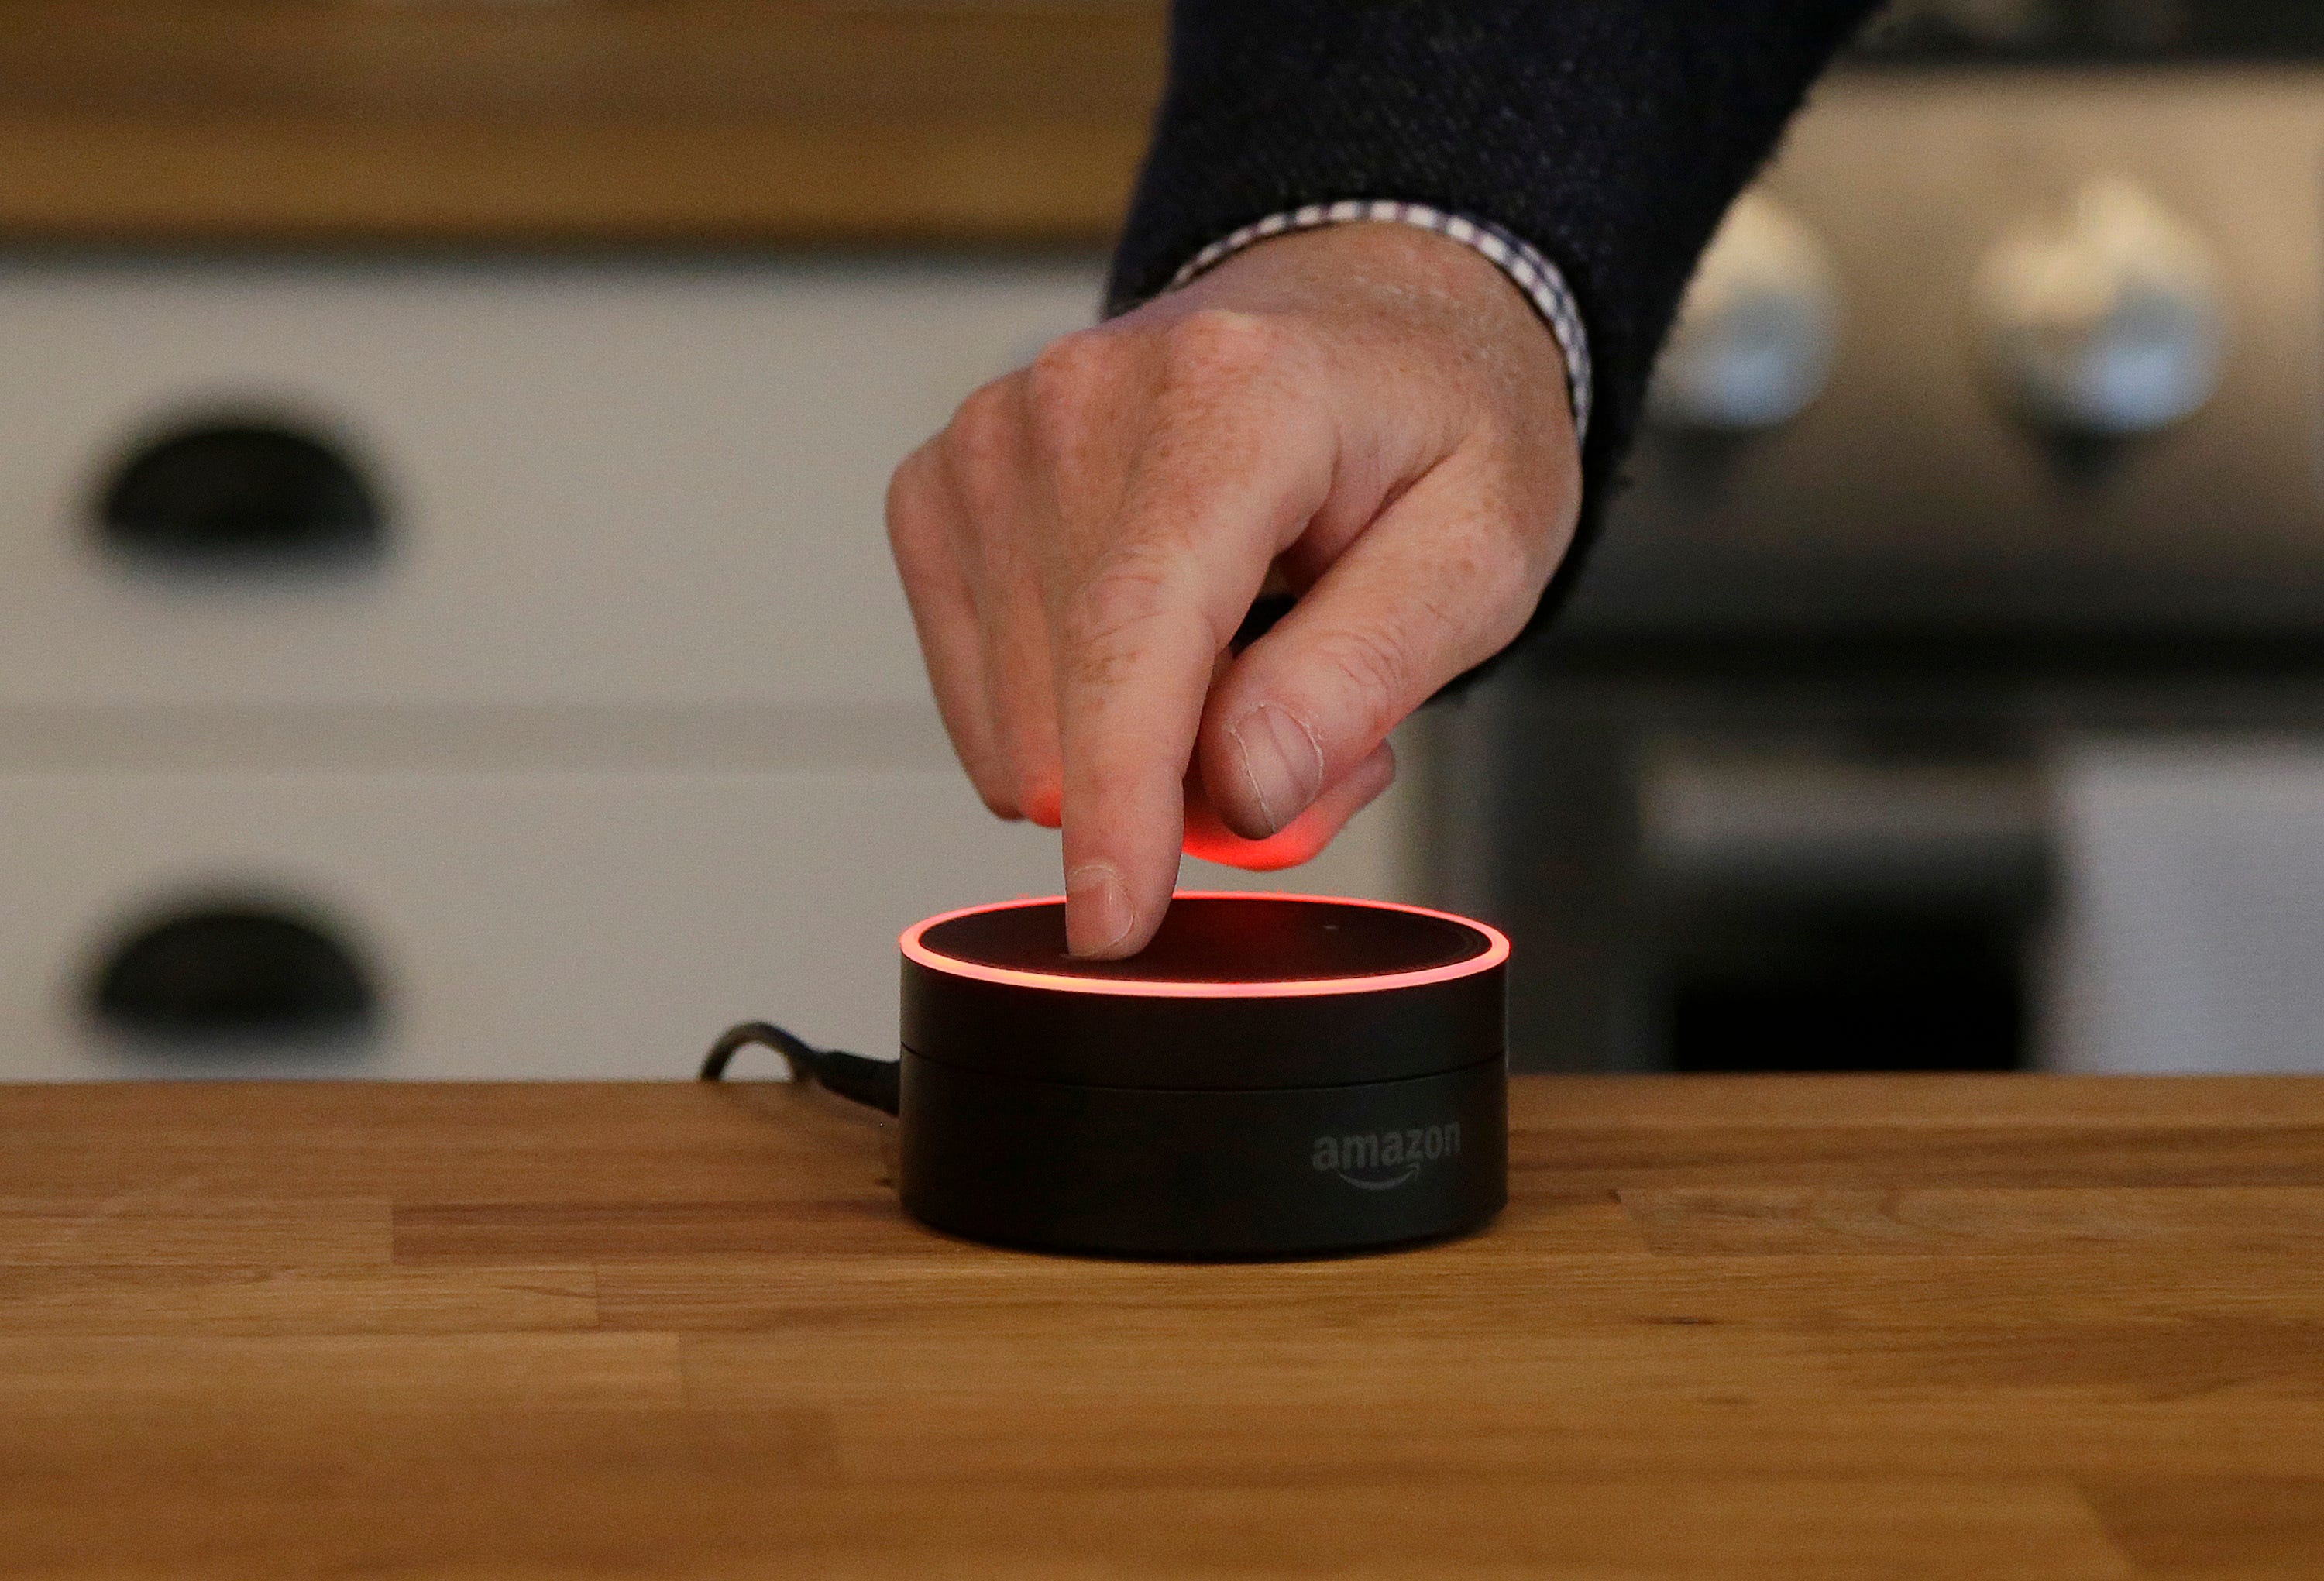 Amazon echo spot review this alexa speaker is as sharp as it is smart - TechMz - The Latest Tech and Gadget News